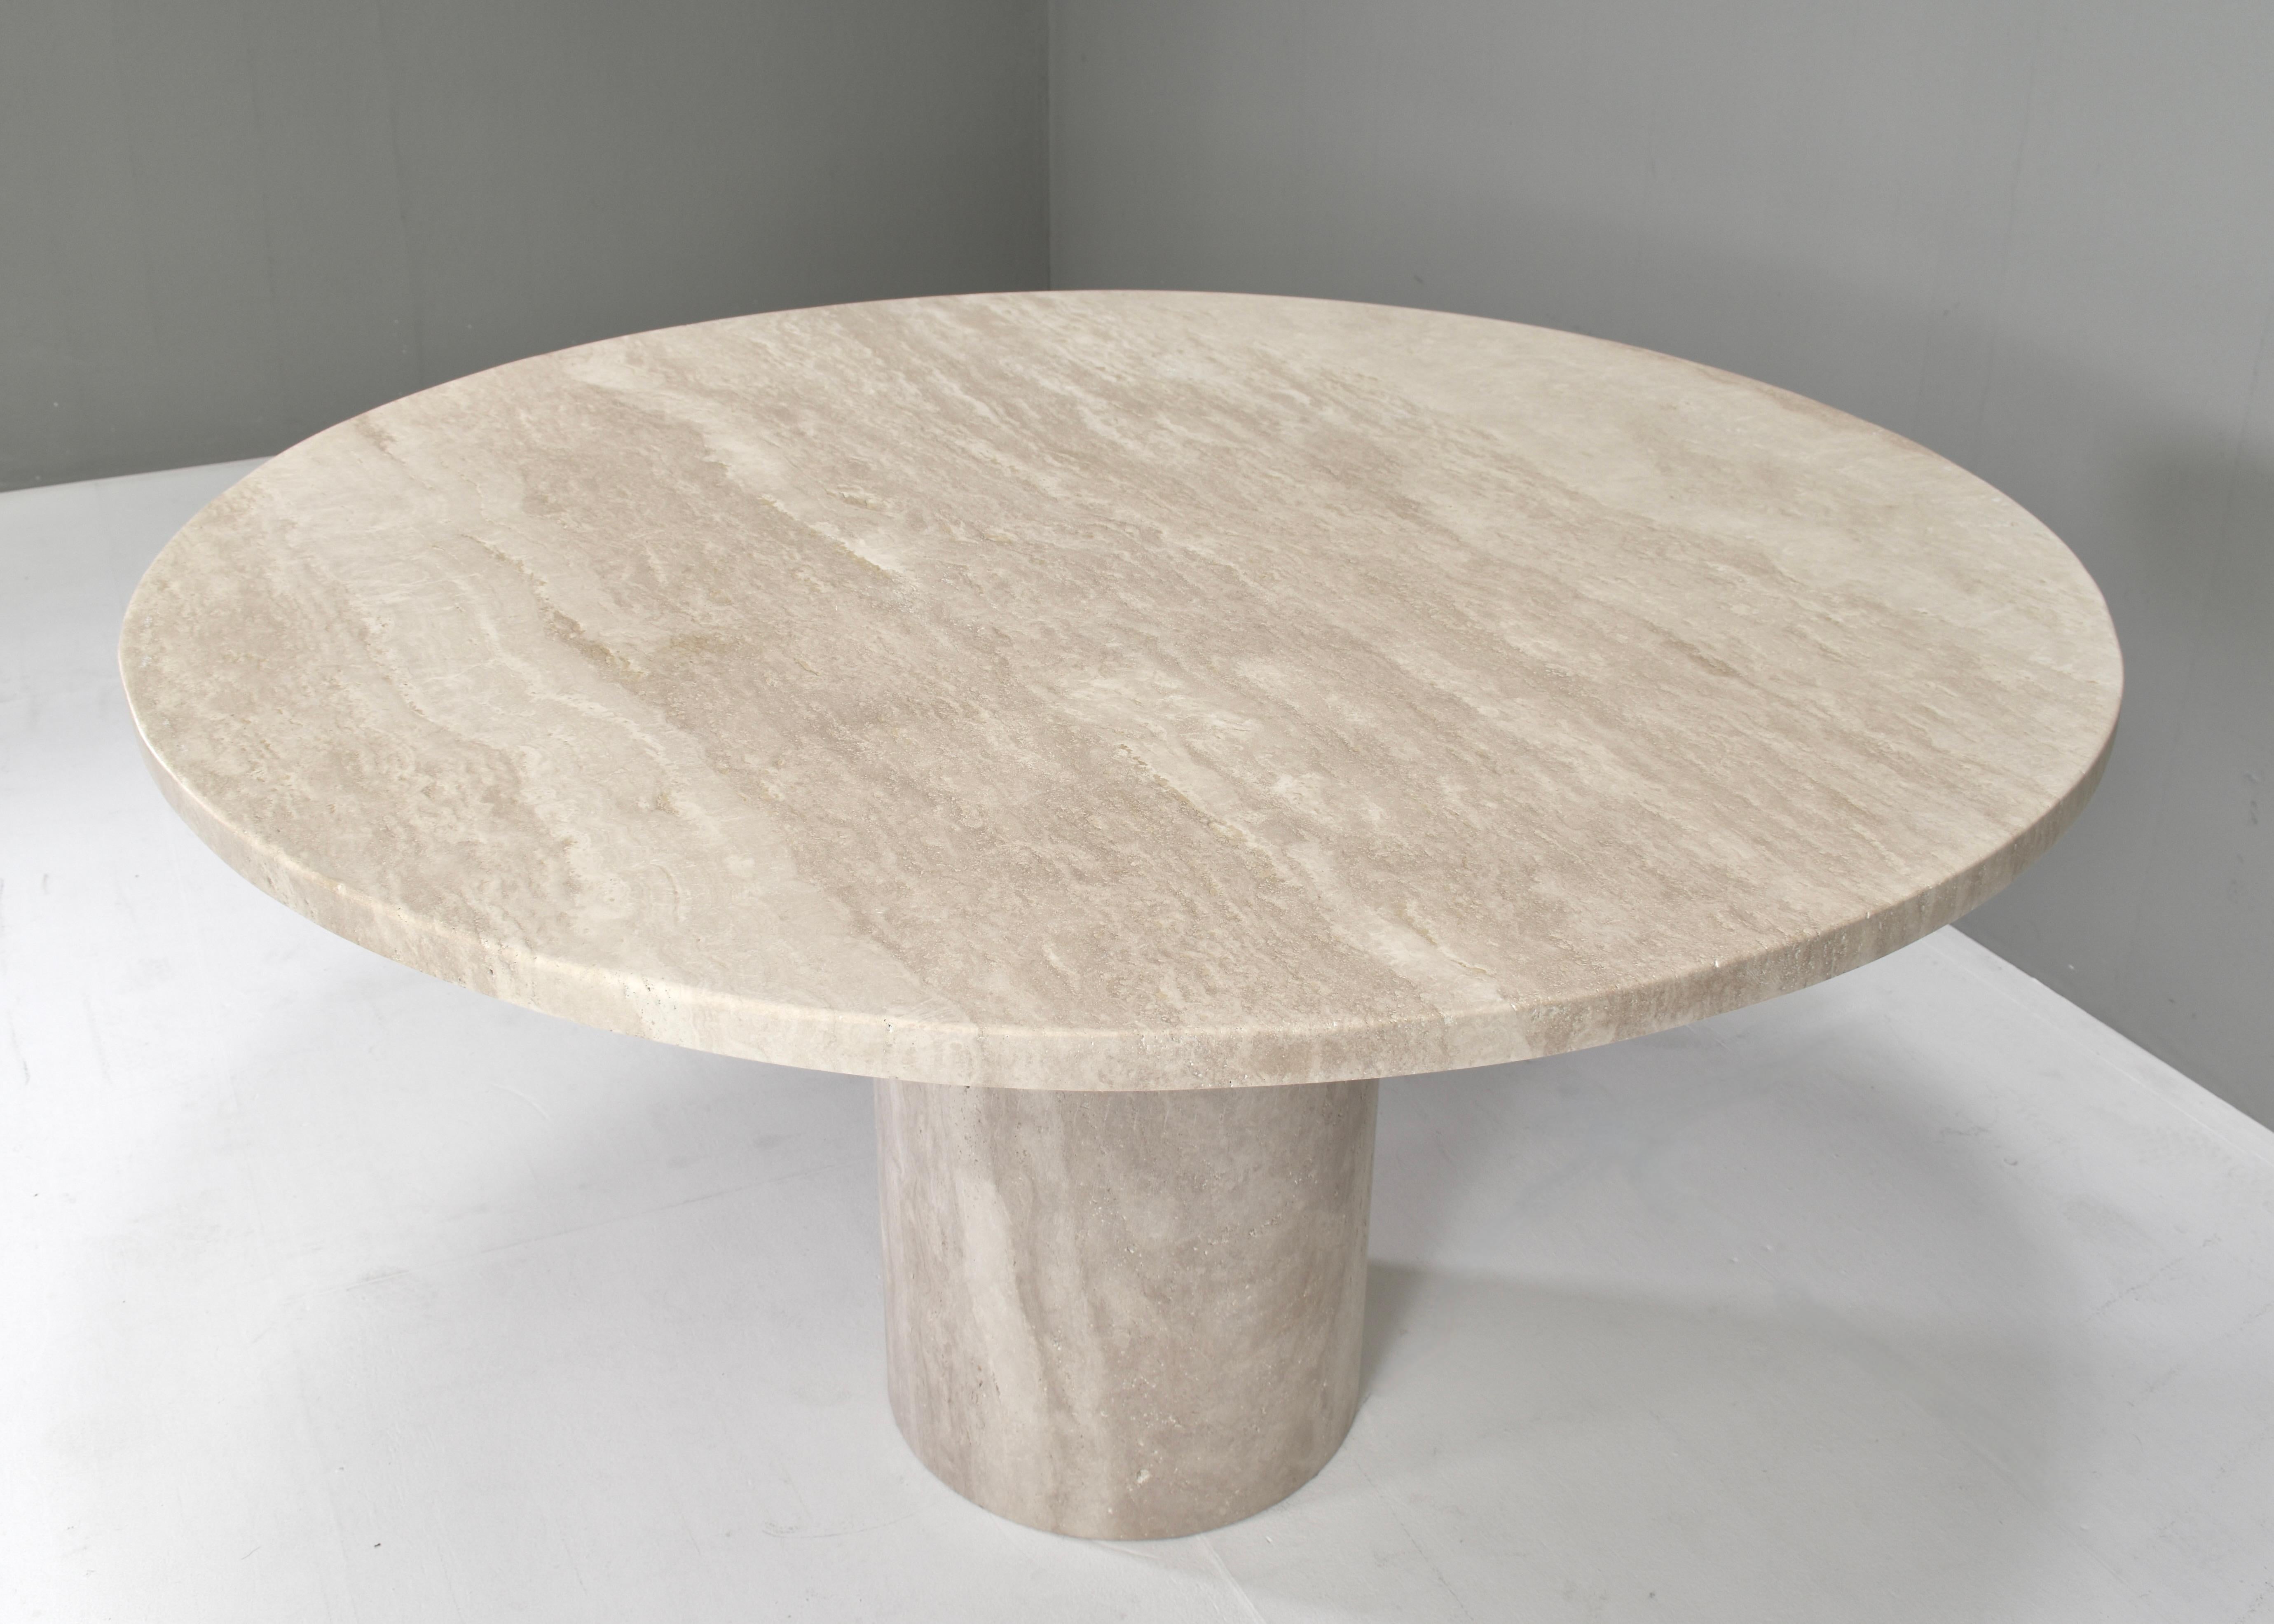 Exquisite Round Travertine Dining Table in the manor of Up& Up / Kelly Wearstler In Excellent Condition For Sale In Pijnacker, Zuid-Holland